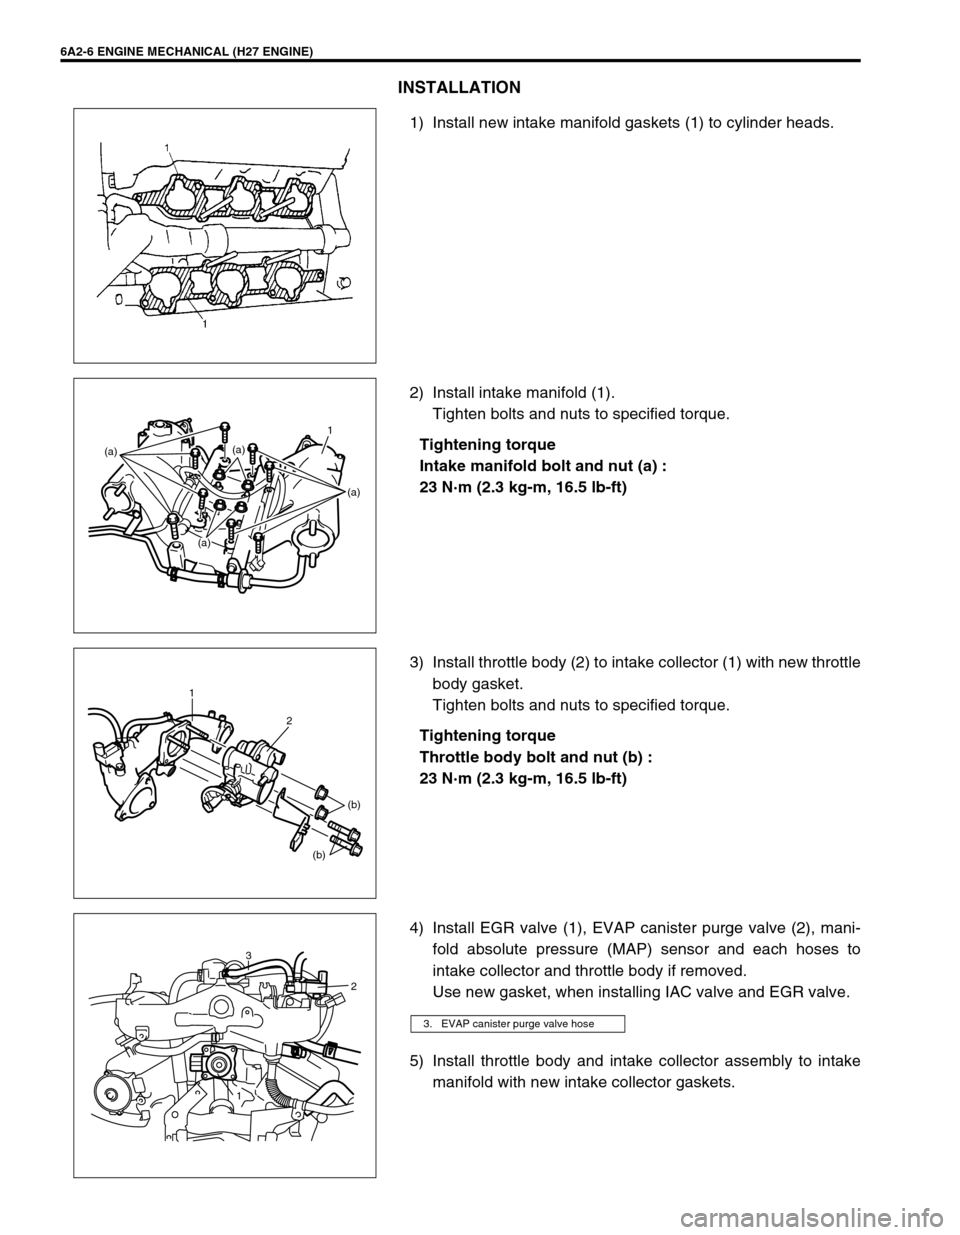 SUZUKI GRAND VITARA 2001 2.G Workshop Manual 6A2-6 ENGINE MECHANICAL (H27 ENGINE)
INSTALLATION
1) Install new intake manifold gaskets (1) to cylinder heads.
2) Install intake manifold (1).
Tighten bolts and nuts to specified torque.
Tightening t